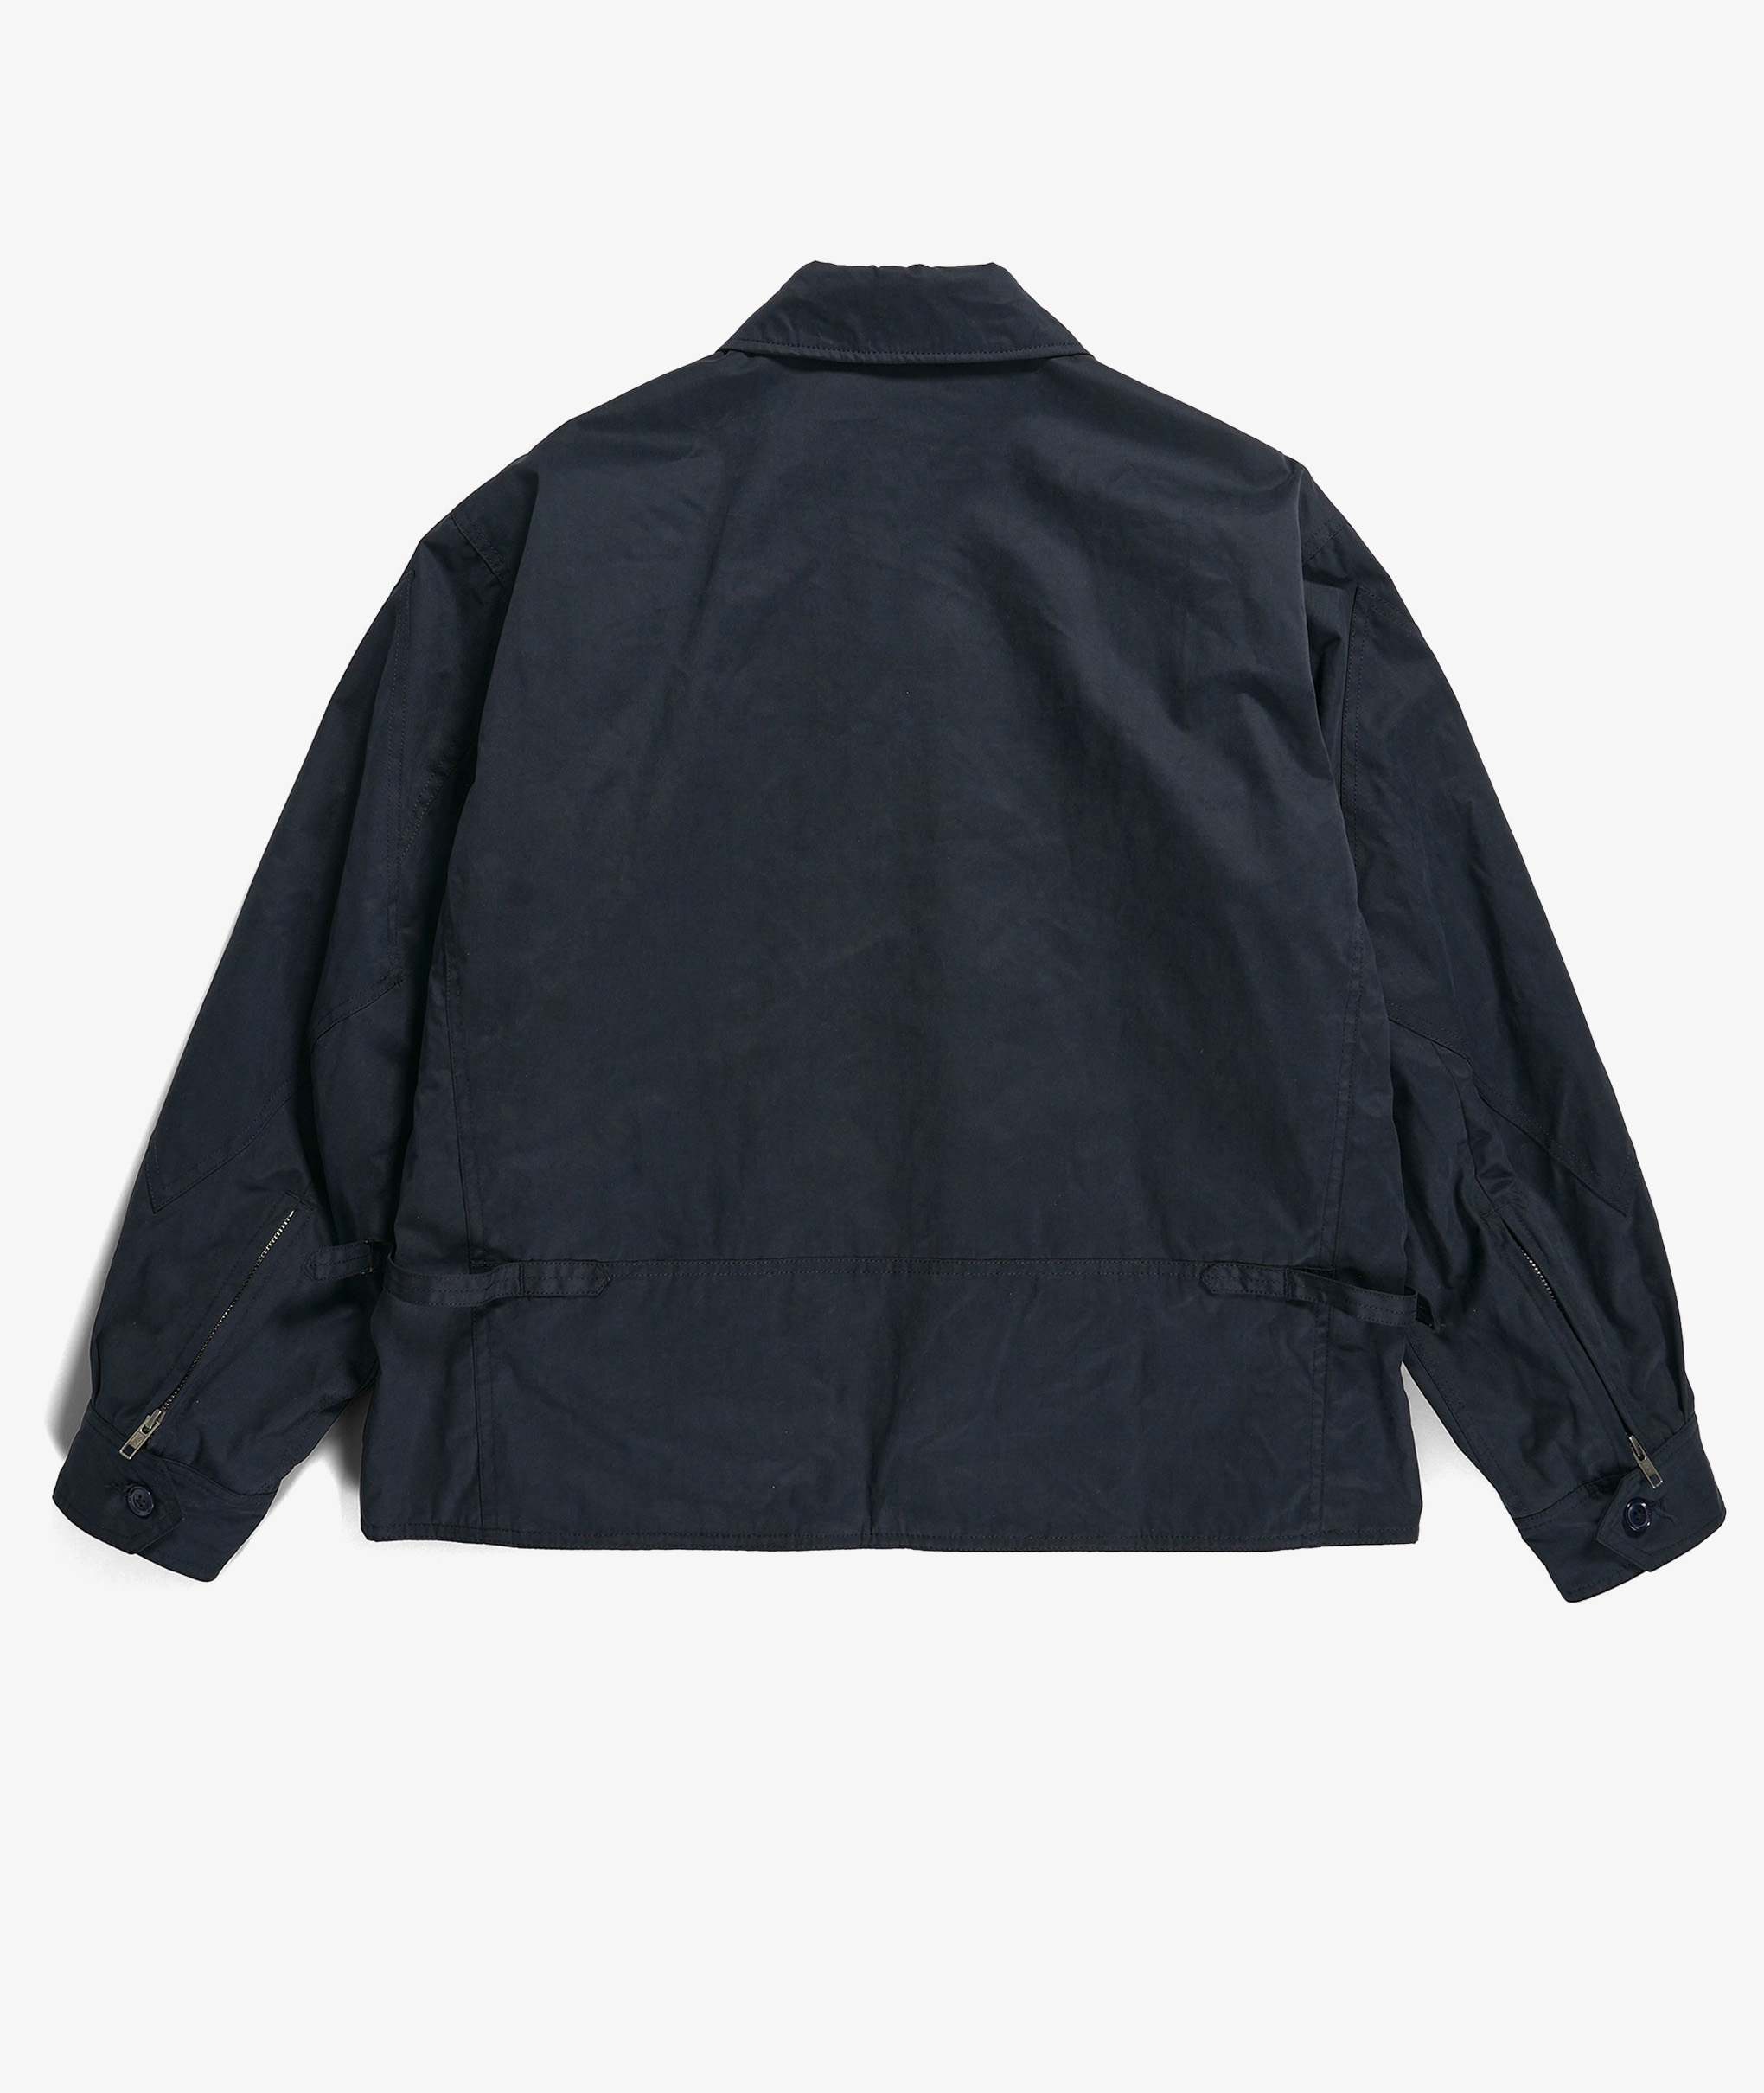 Norse Store | Shipping Worldwide - Engineered Garments G8 Jacket 